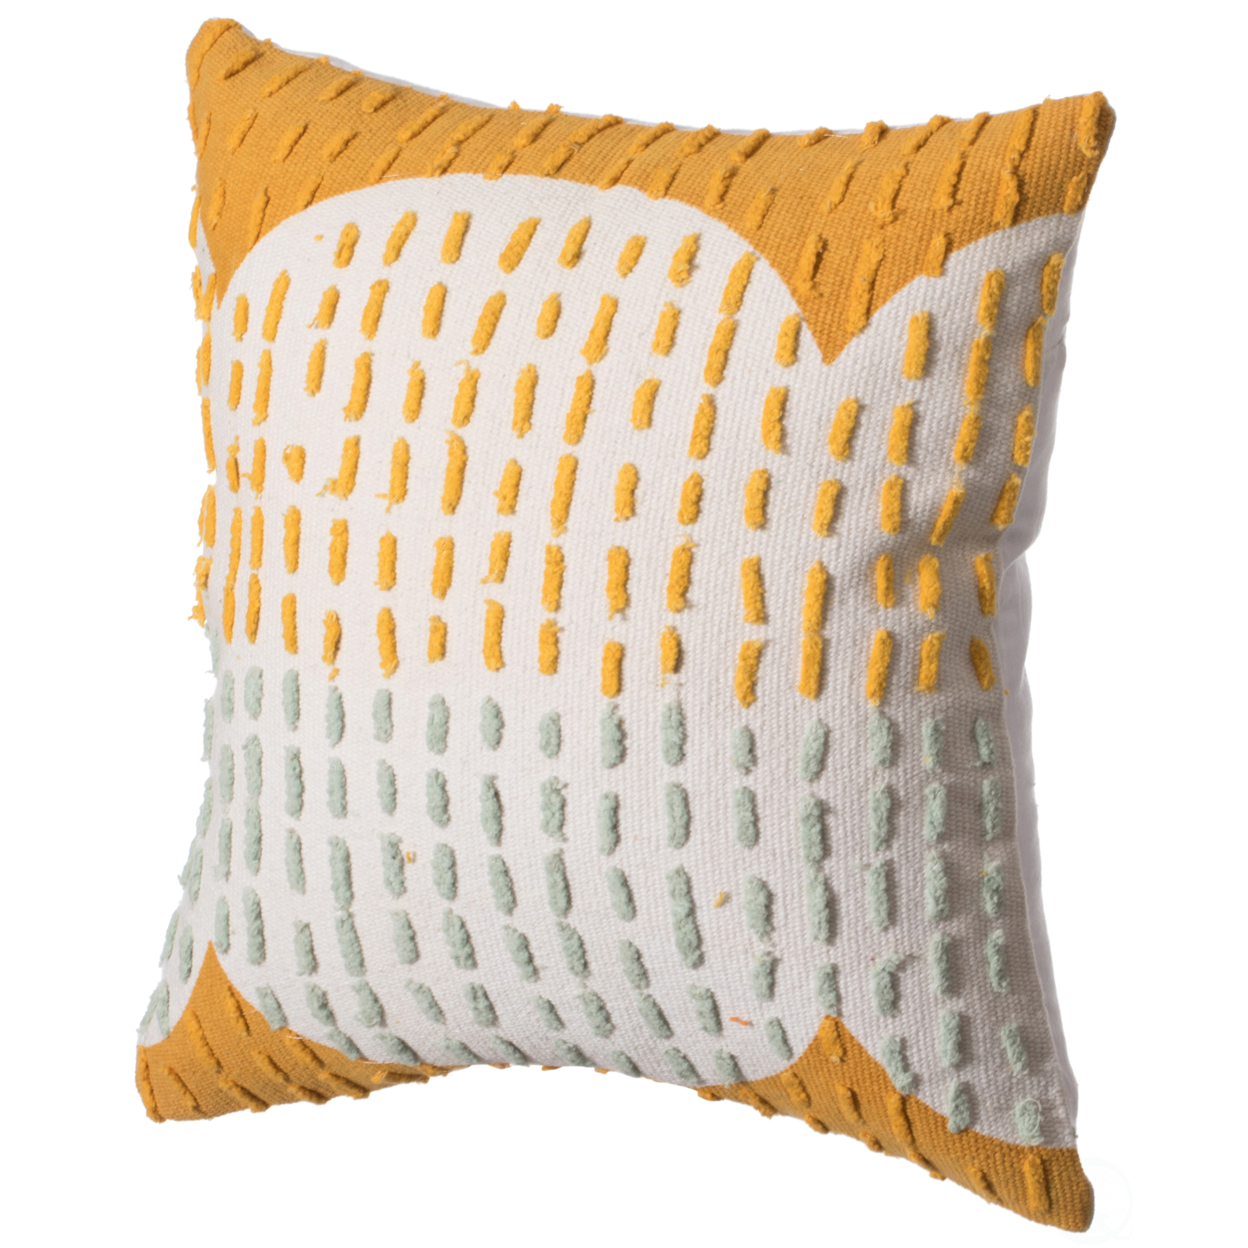 16" Handwoven Cotton Throw Pillow Cover with Ribbed Line Dots and Wave Border - mustard with cushion